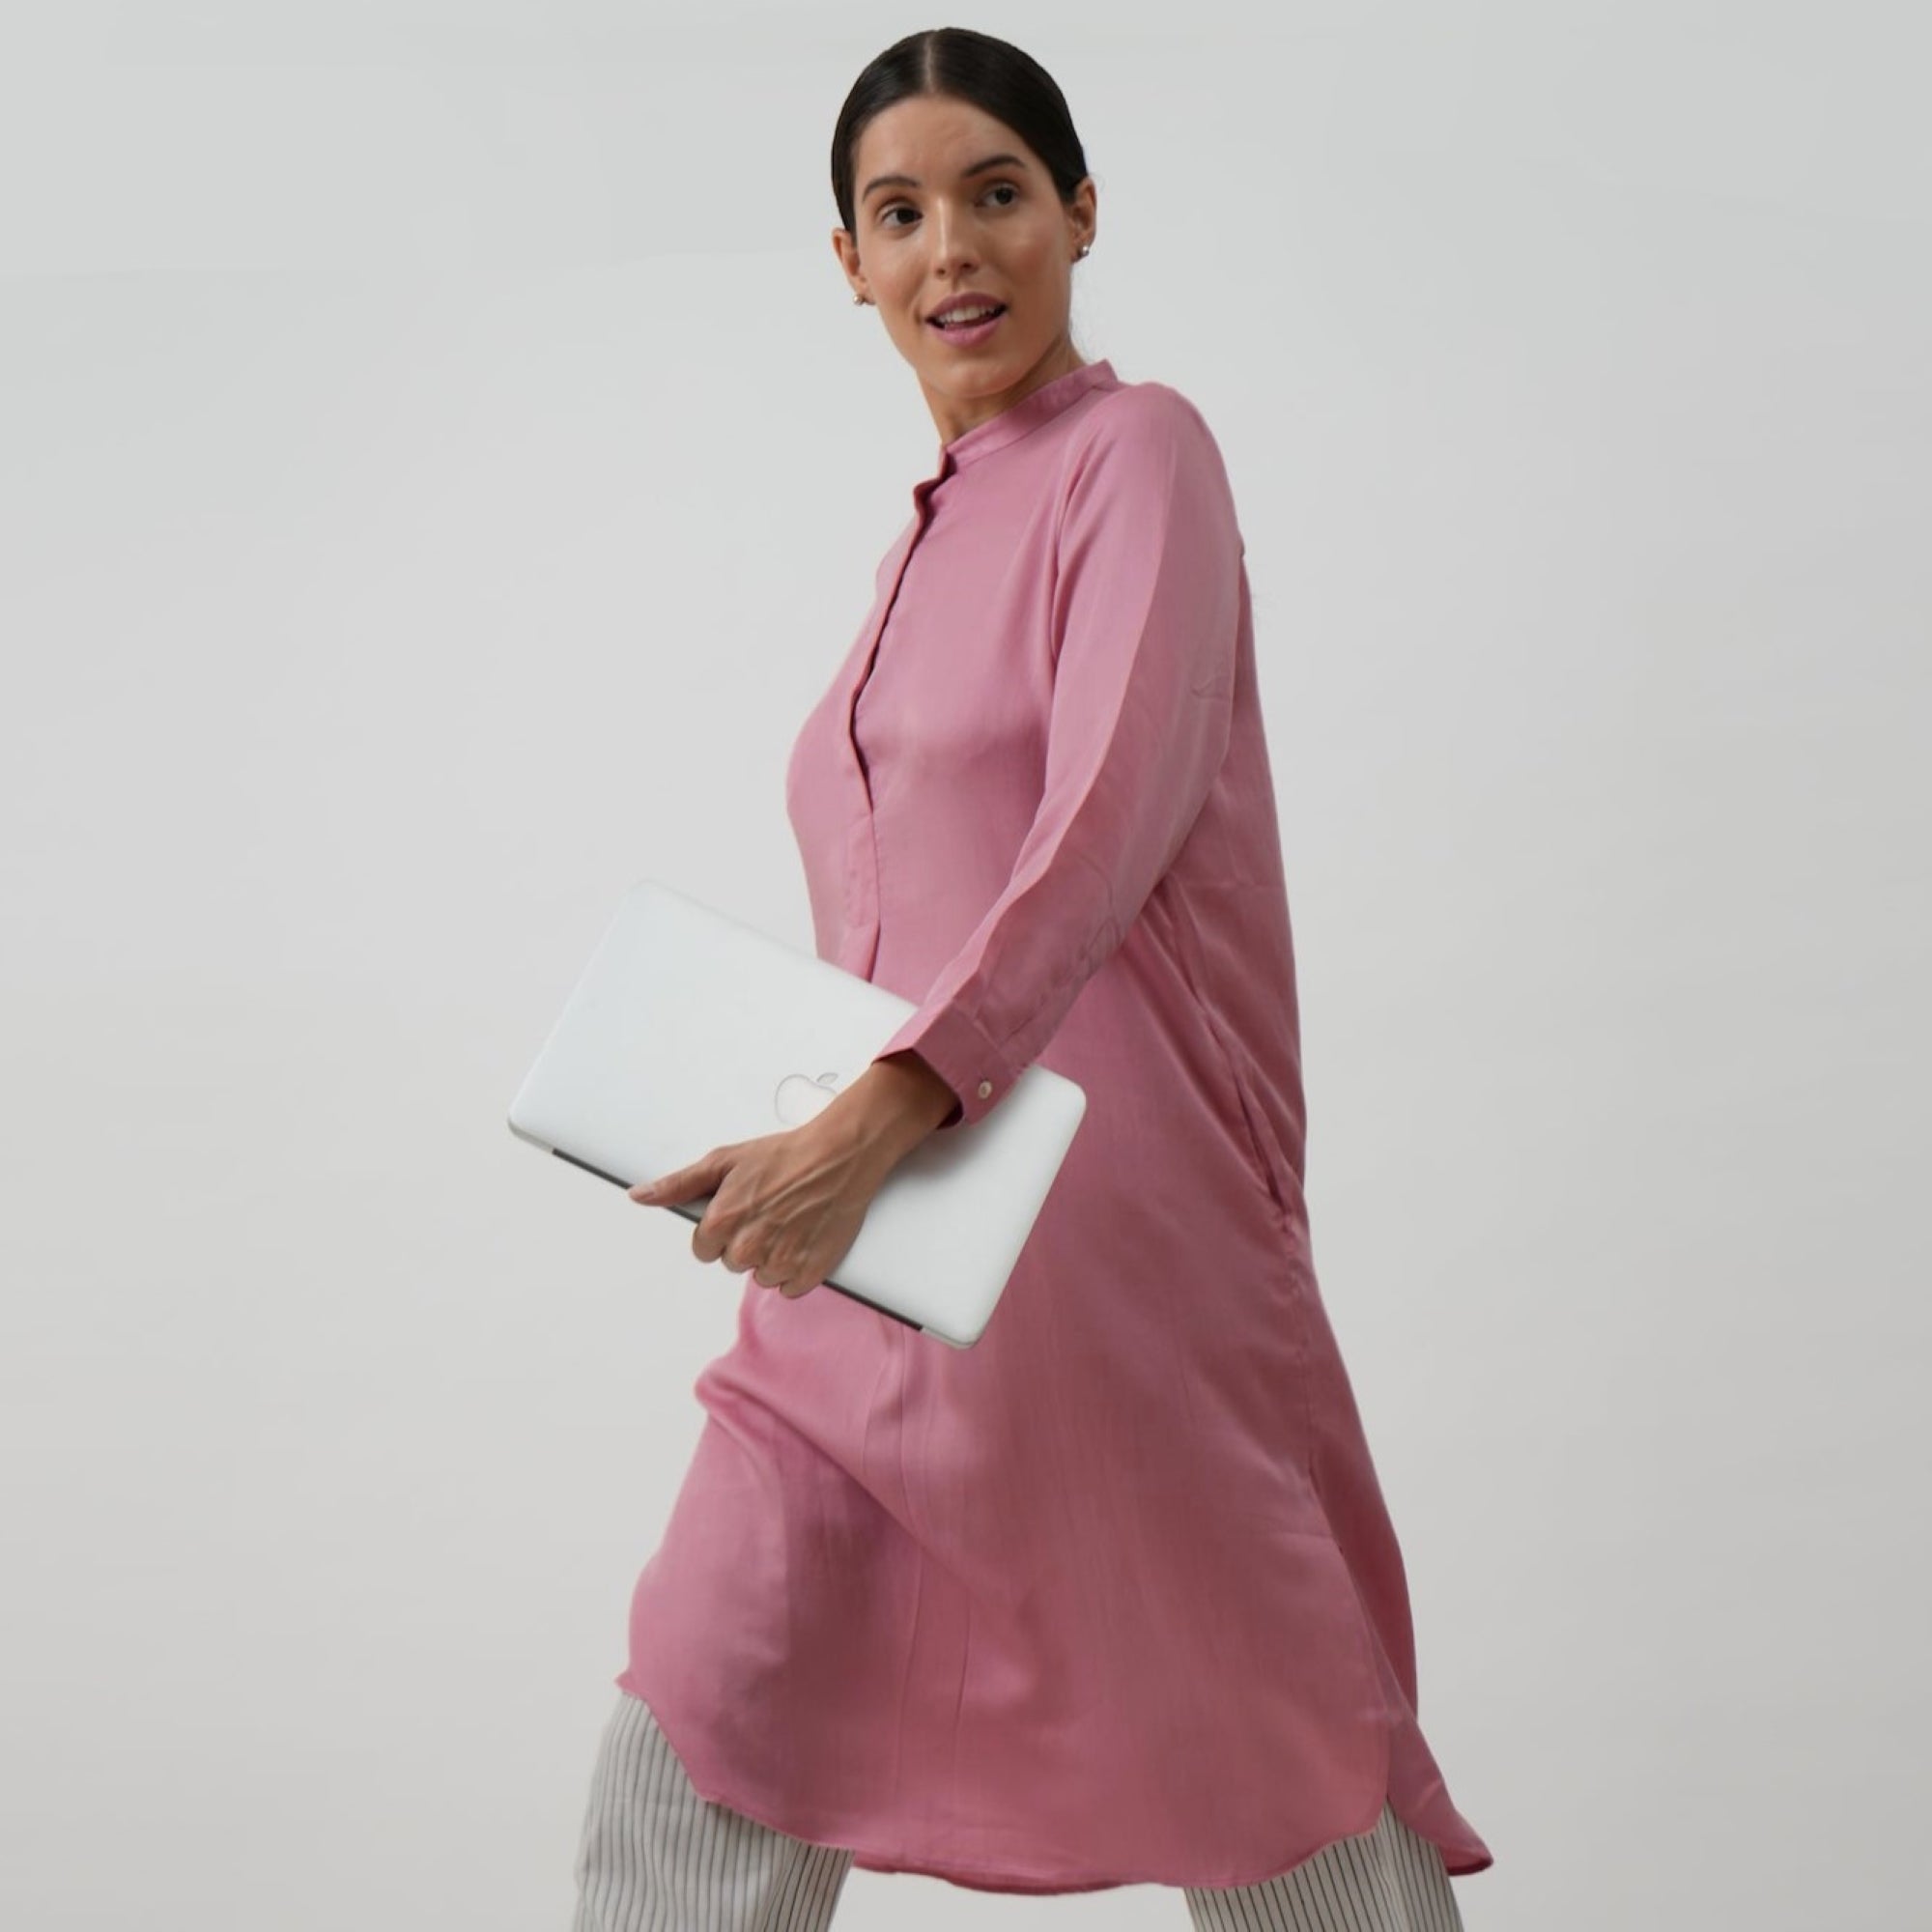 Pleated Tunic - Dusty Pink